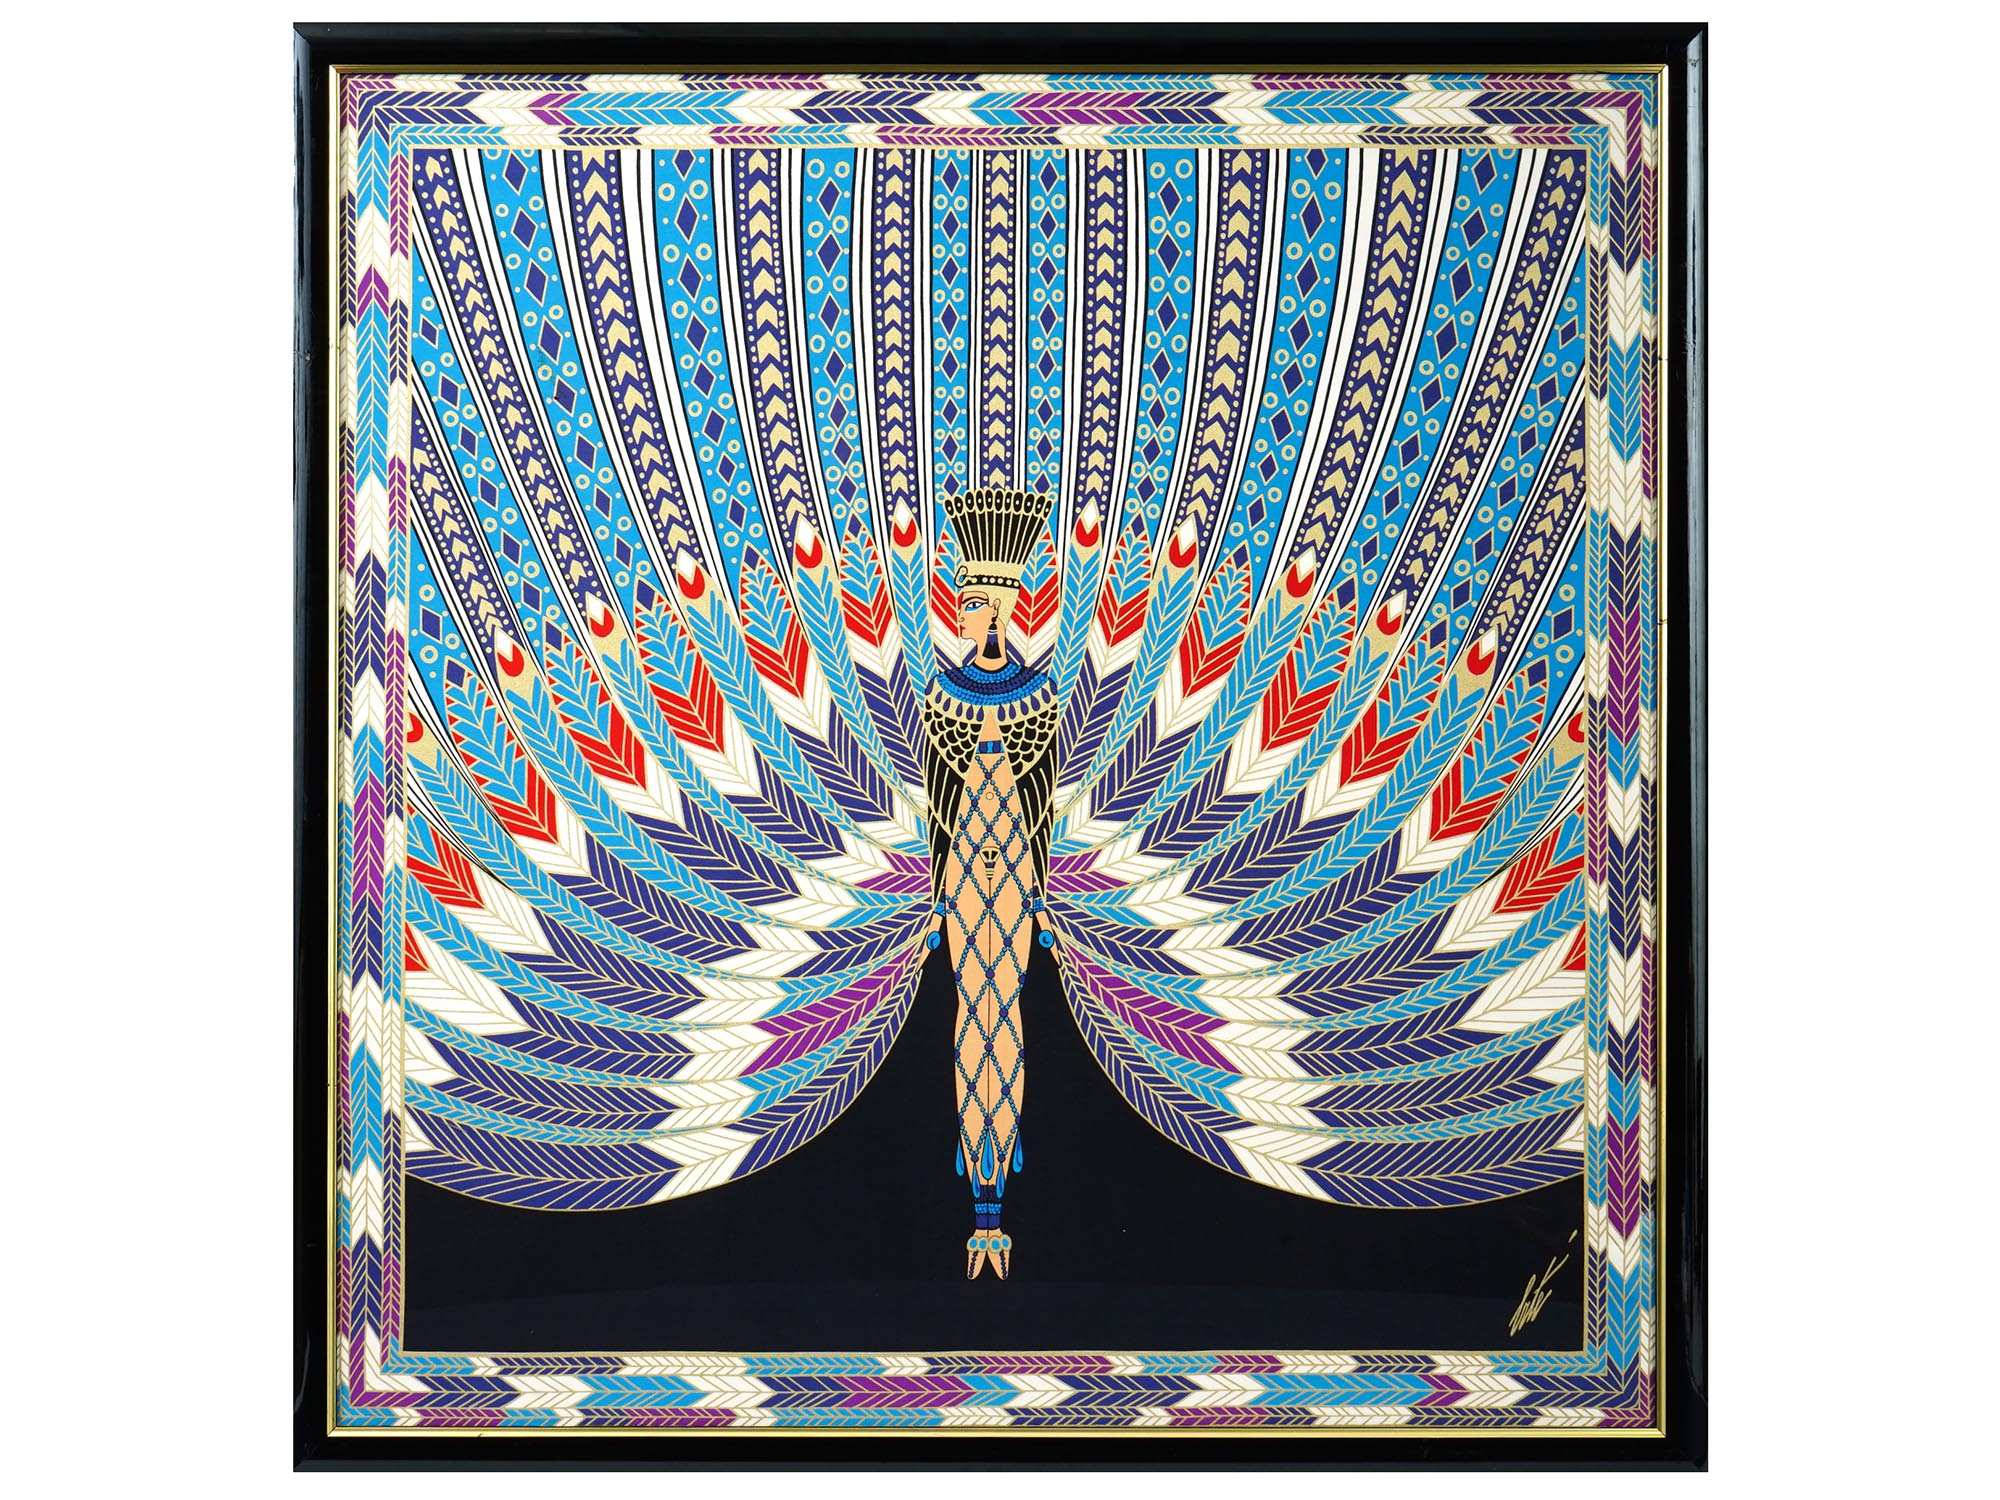 ART DECO FRENCH NILE SILK SCARF ART BY ERTE SIGNED PIC-0